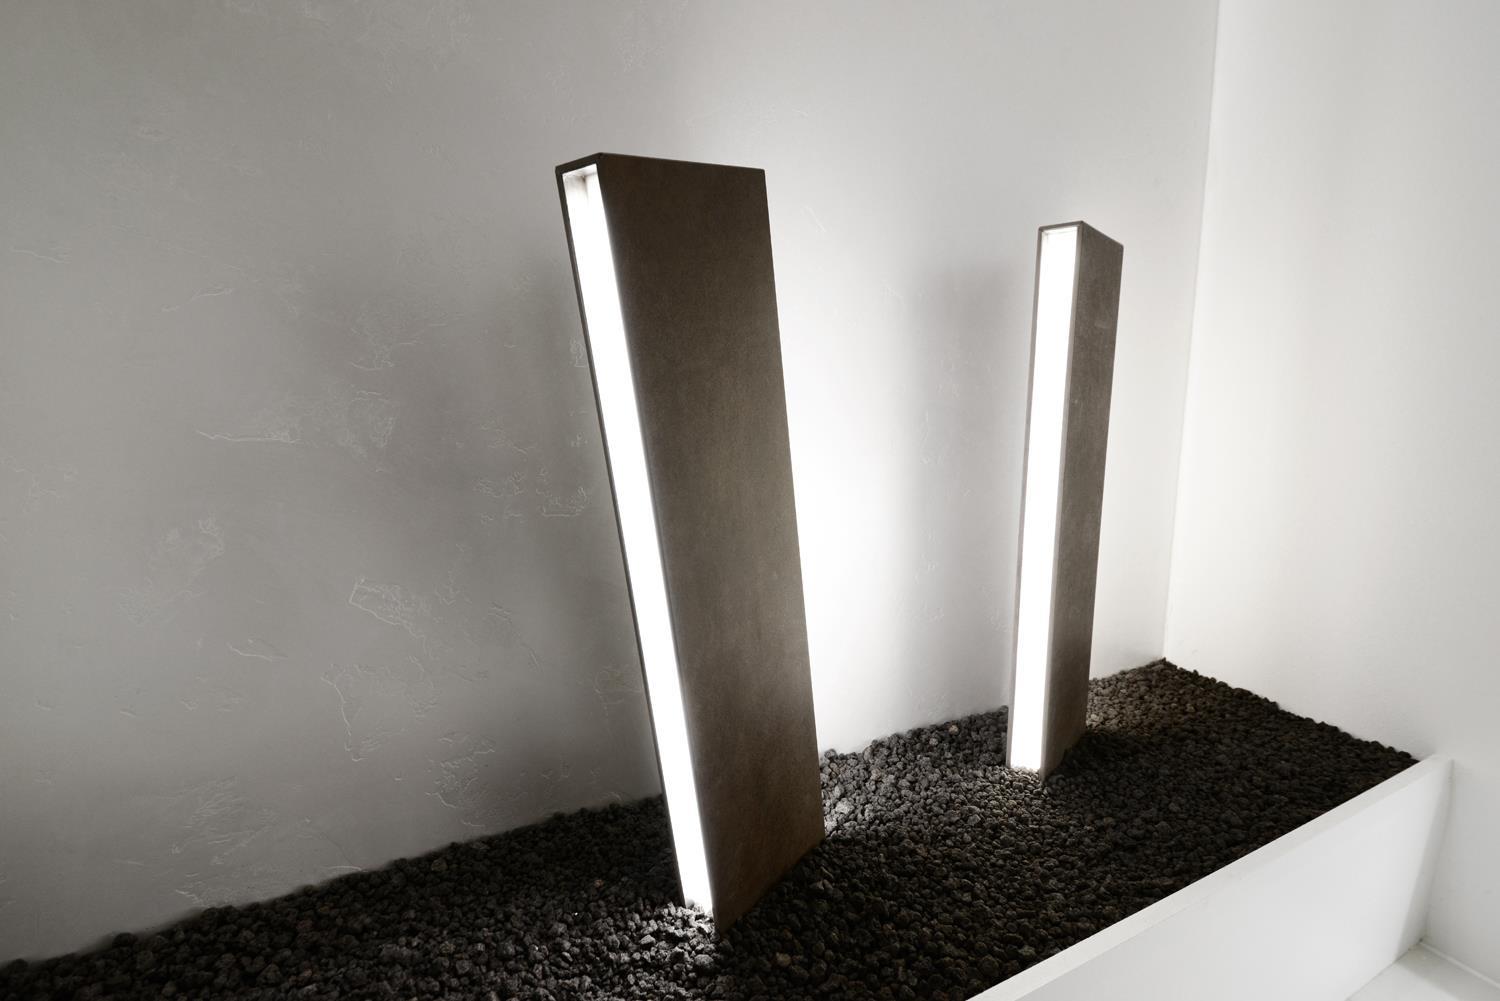 Cotto D'Este announces the winners of "KERLIGHT - Design your light with Kerlite": Photo 5